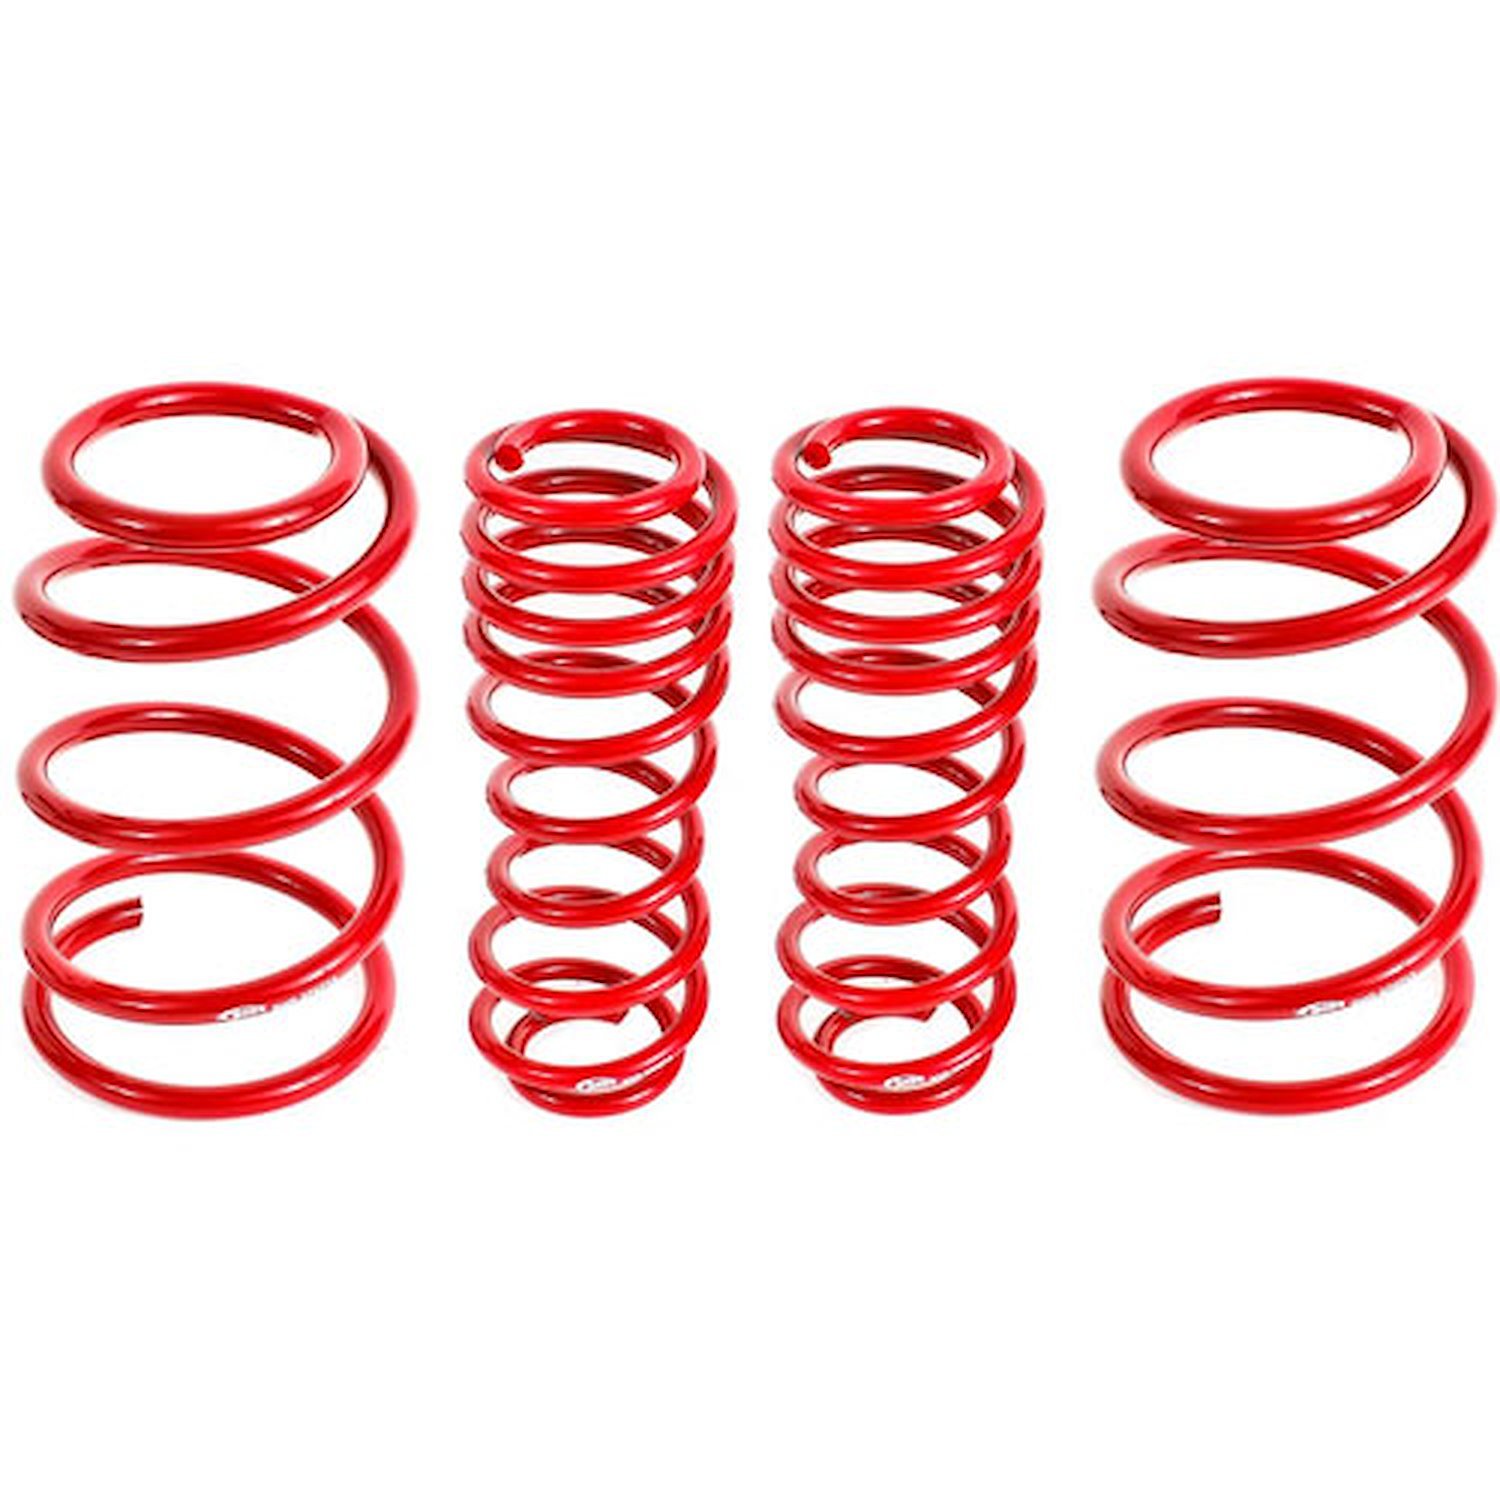 Performance Lowering Spring Kit 2007-14 Mustang Shelby GT500